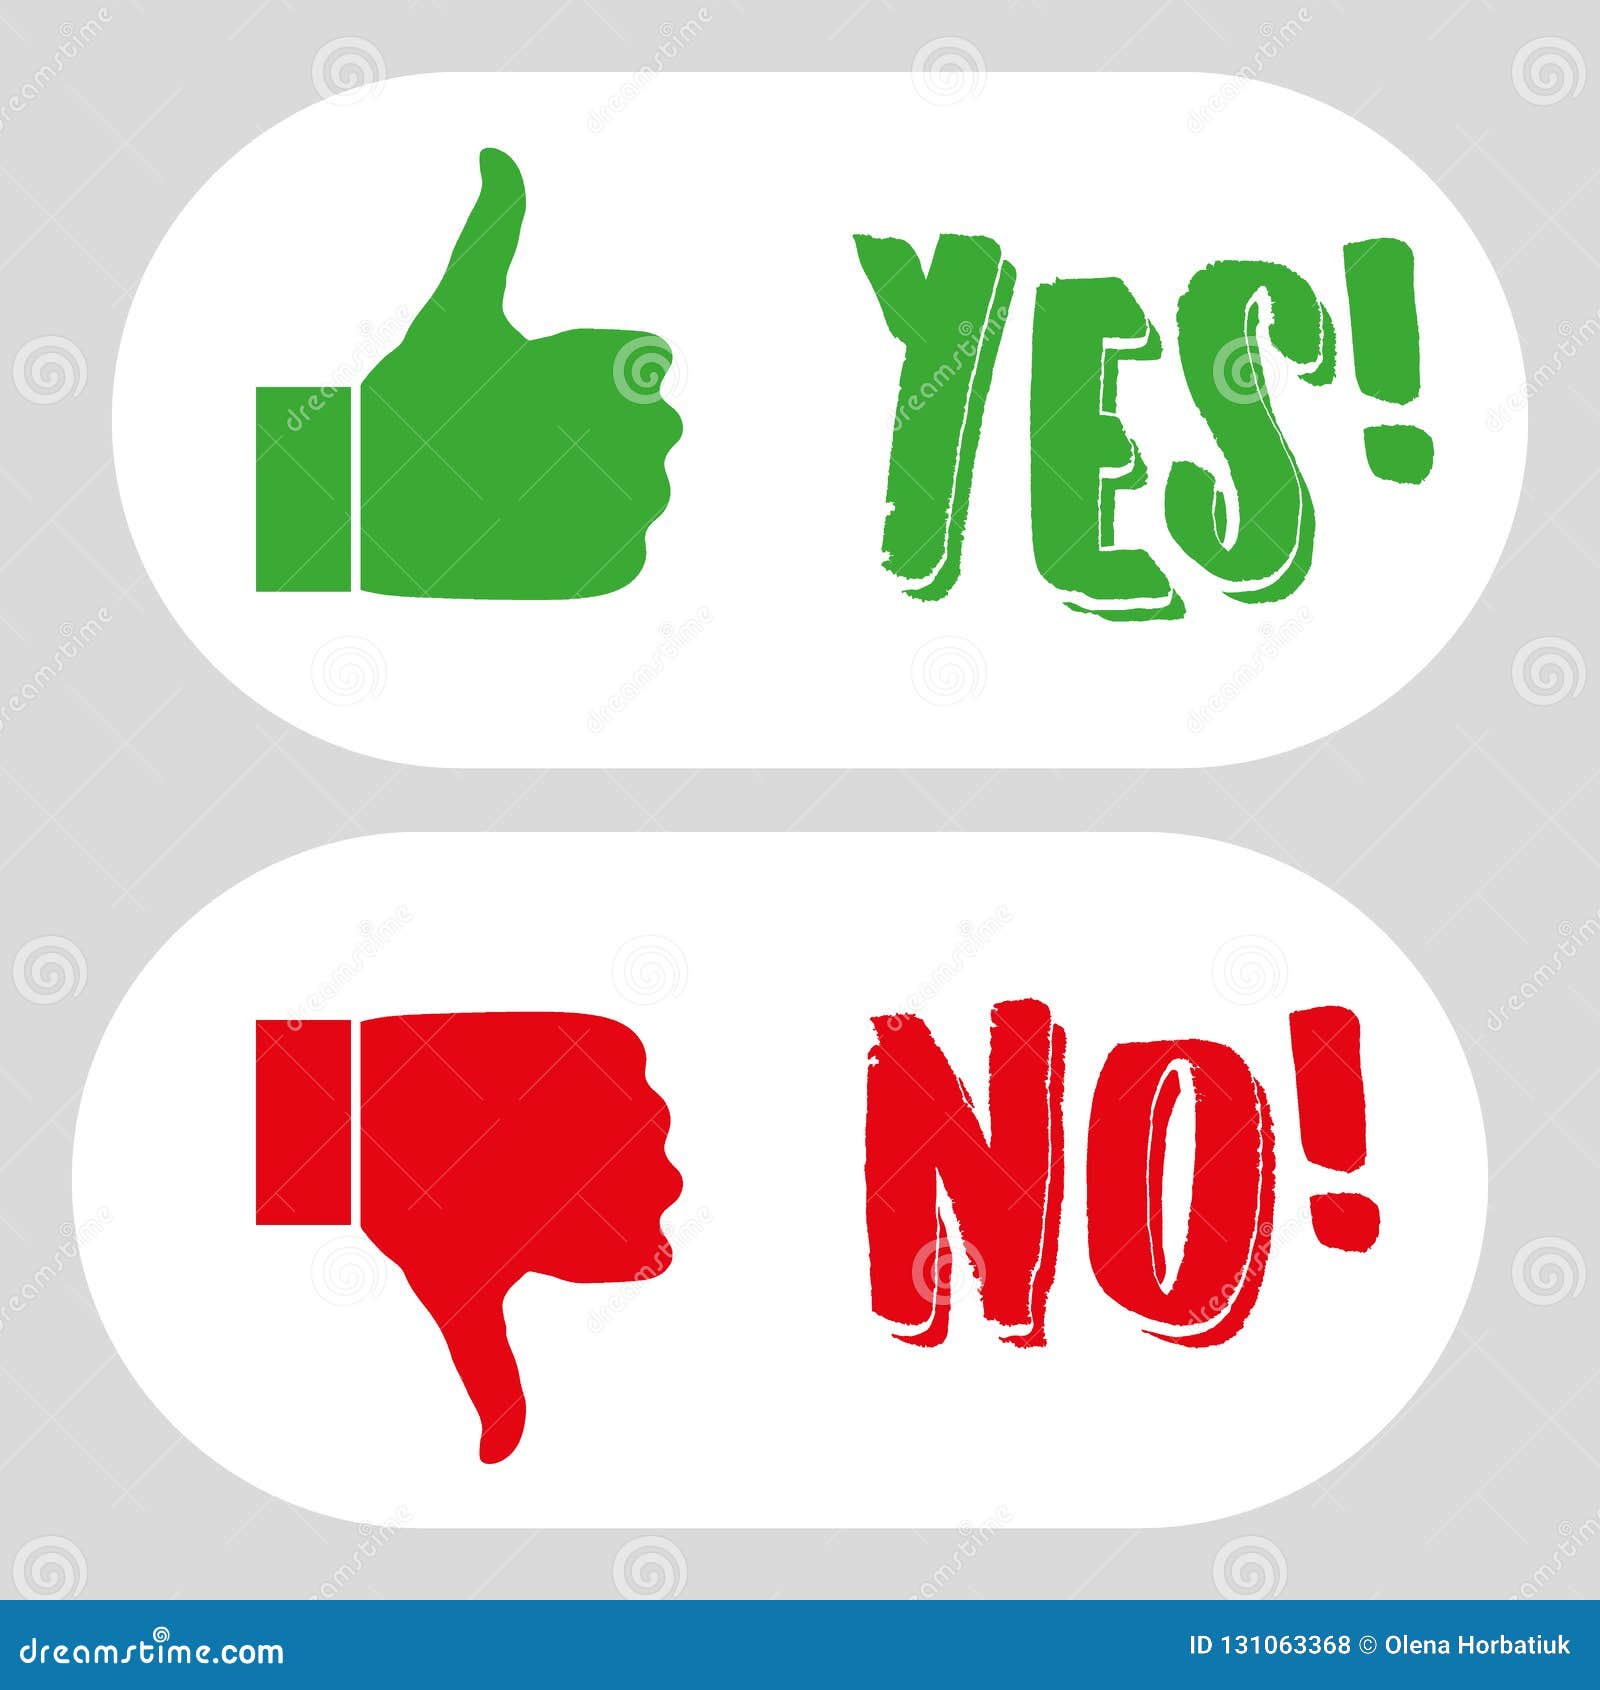 Yes No Thumbs Up Down Stock Illustrations 151 Yes No Thumbs Up Down Stock Illustrations Vectors Clipart Dreamstime